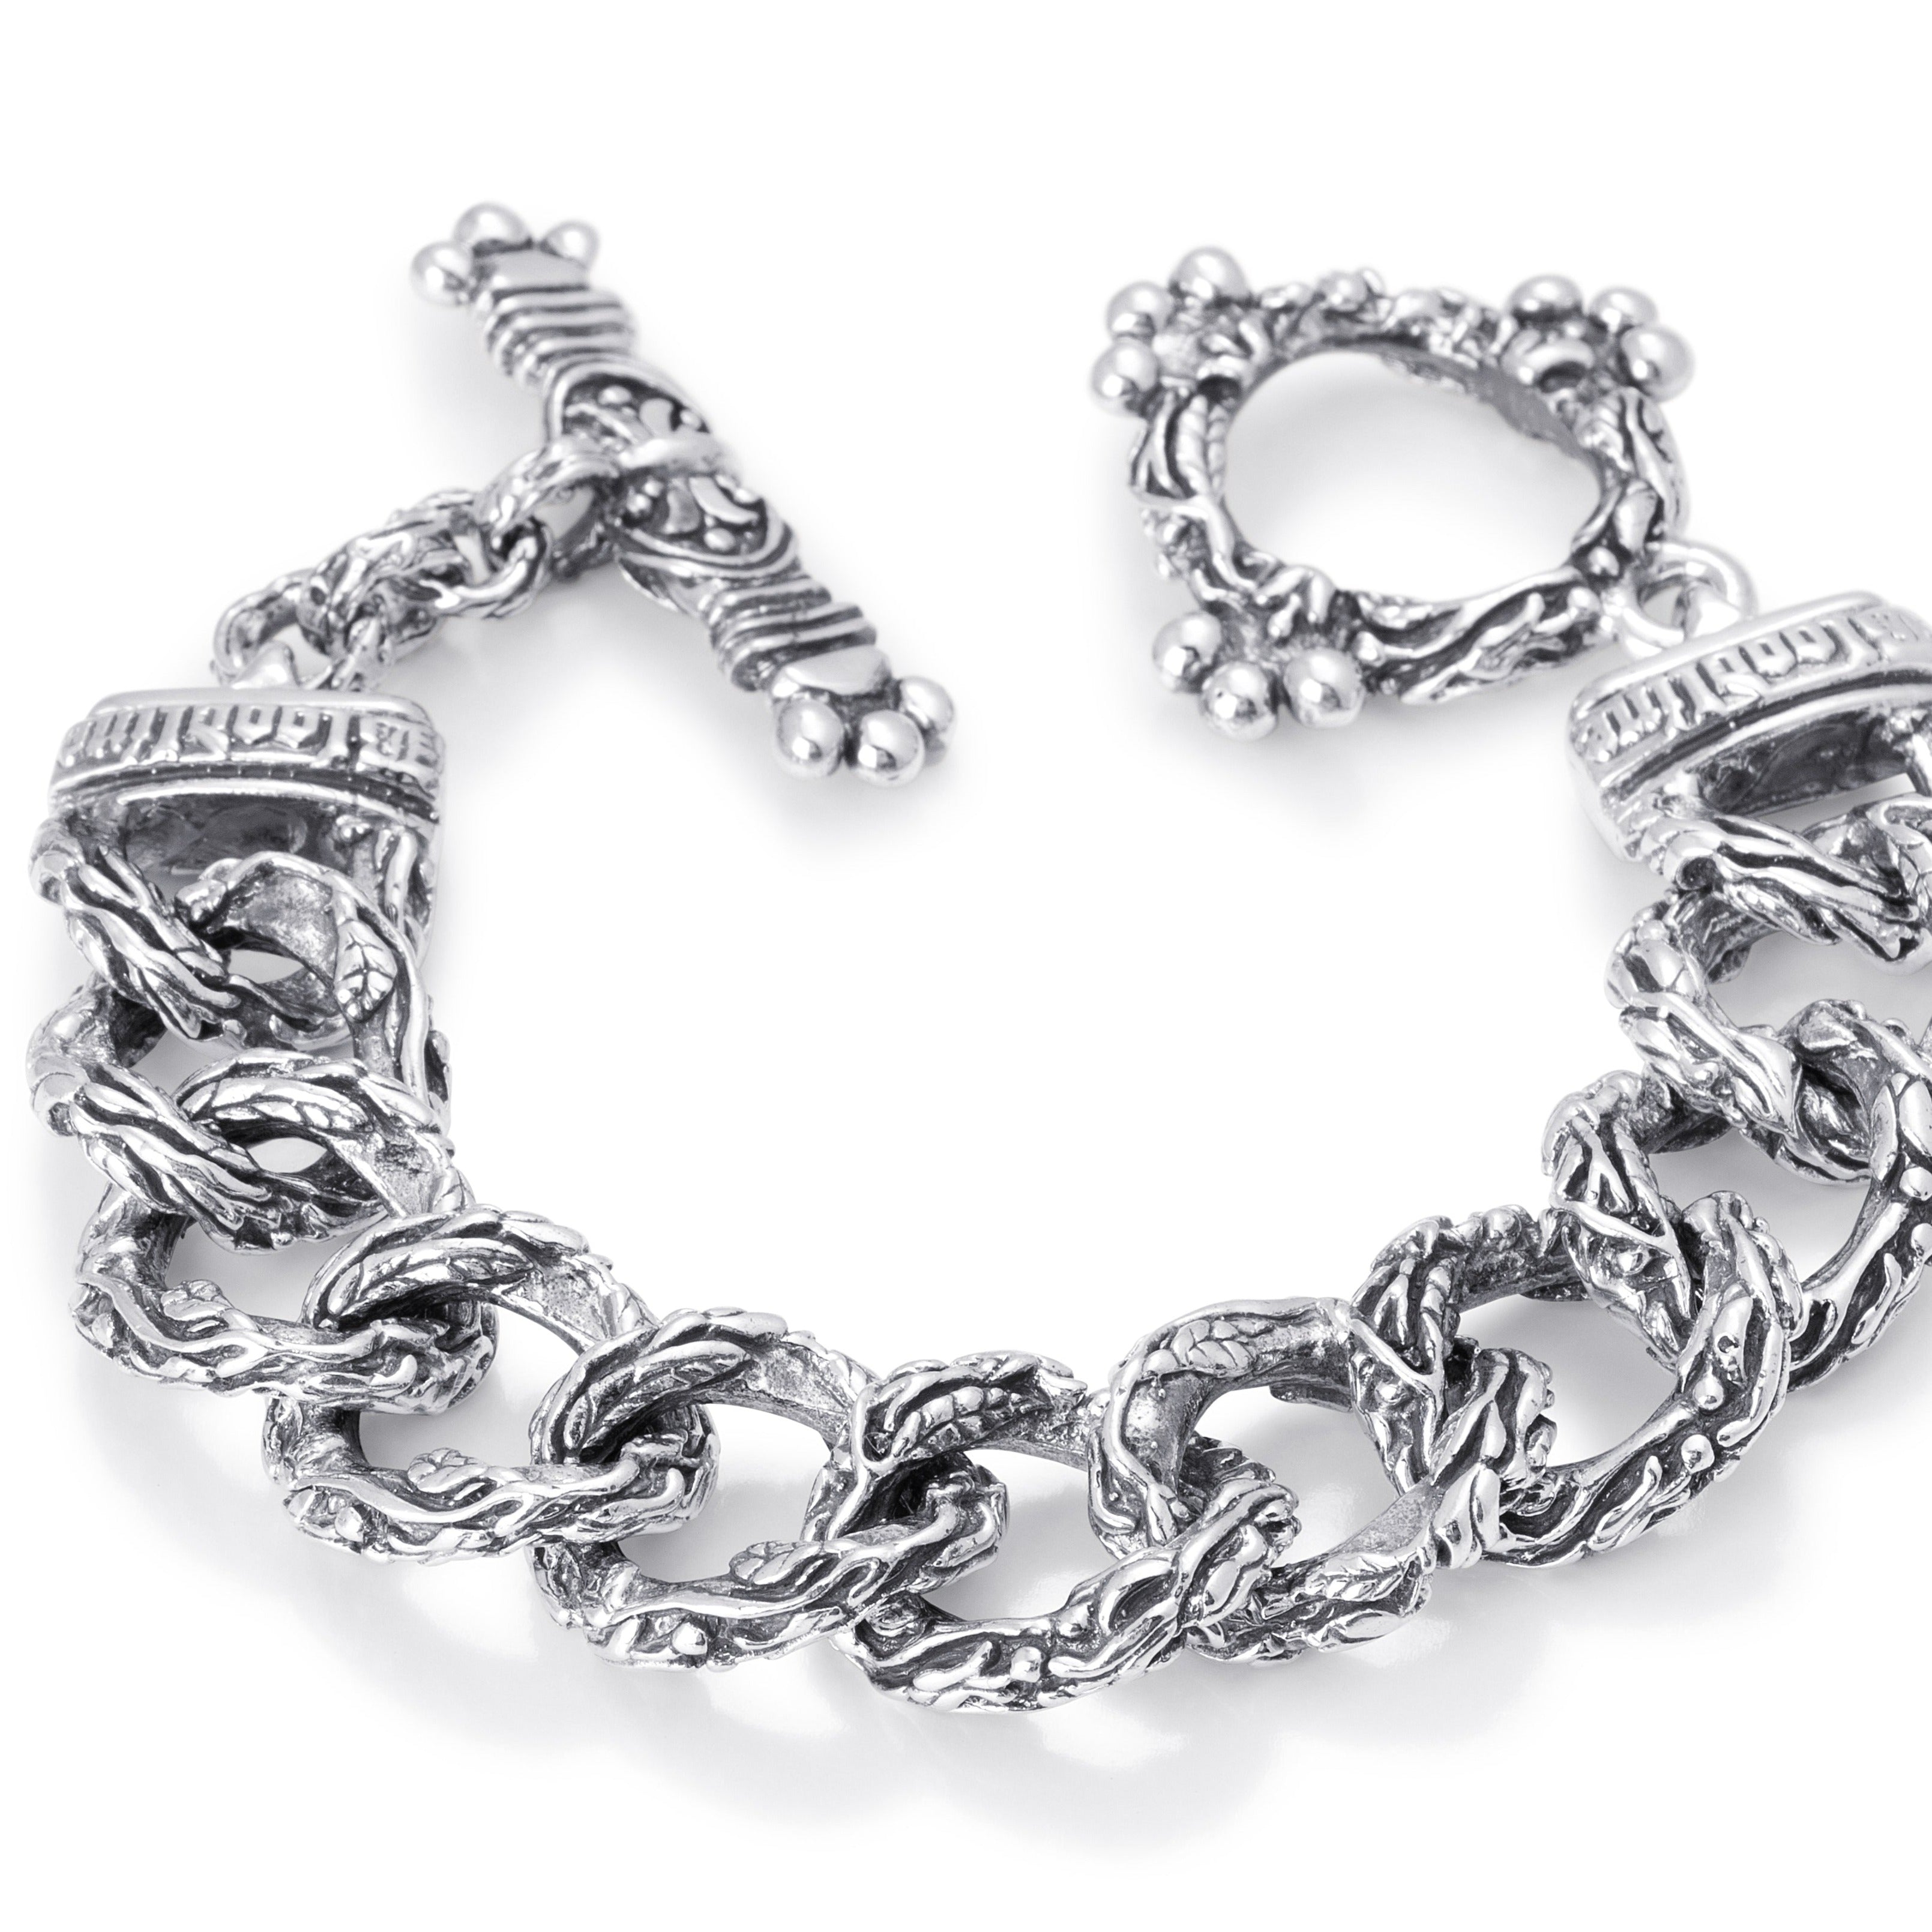 Ornate Eternal Vine Curb Link Chain Bracelet in Sterling Silver with a toggle clasp, by Bloodline Design